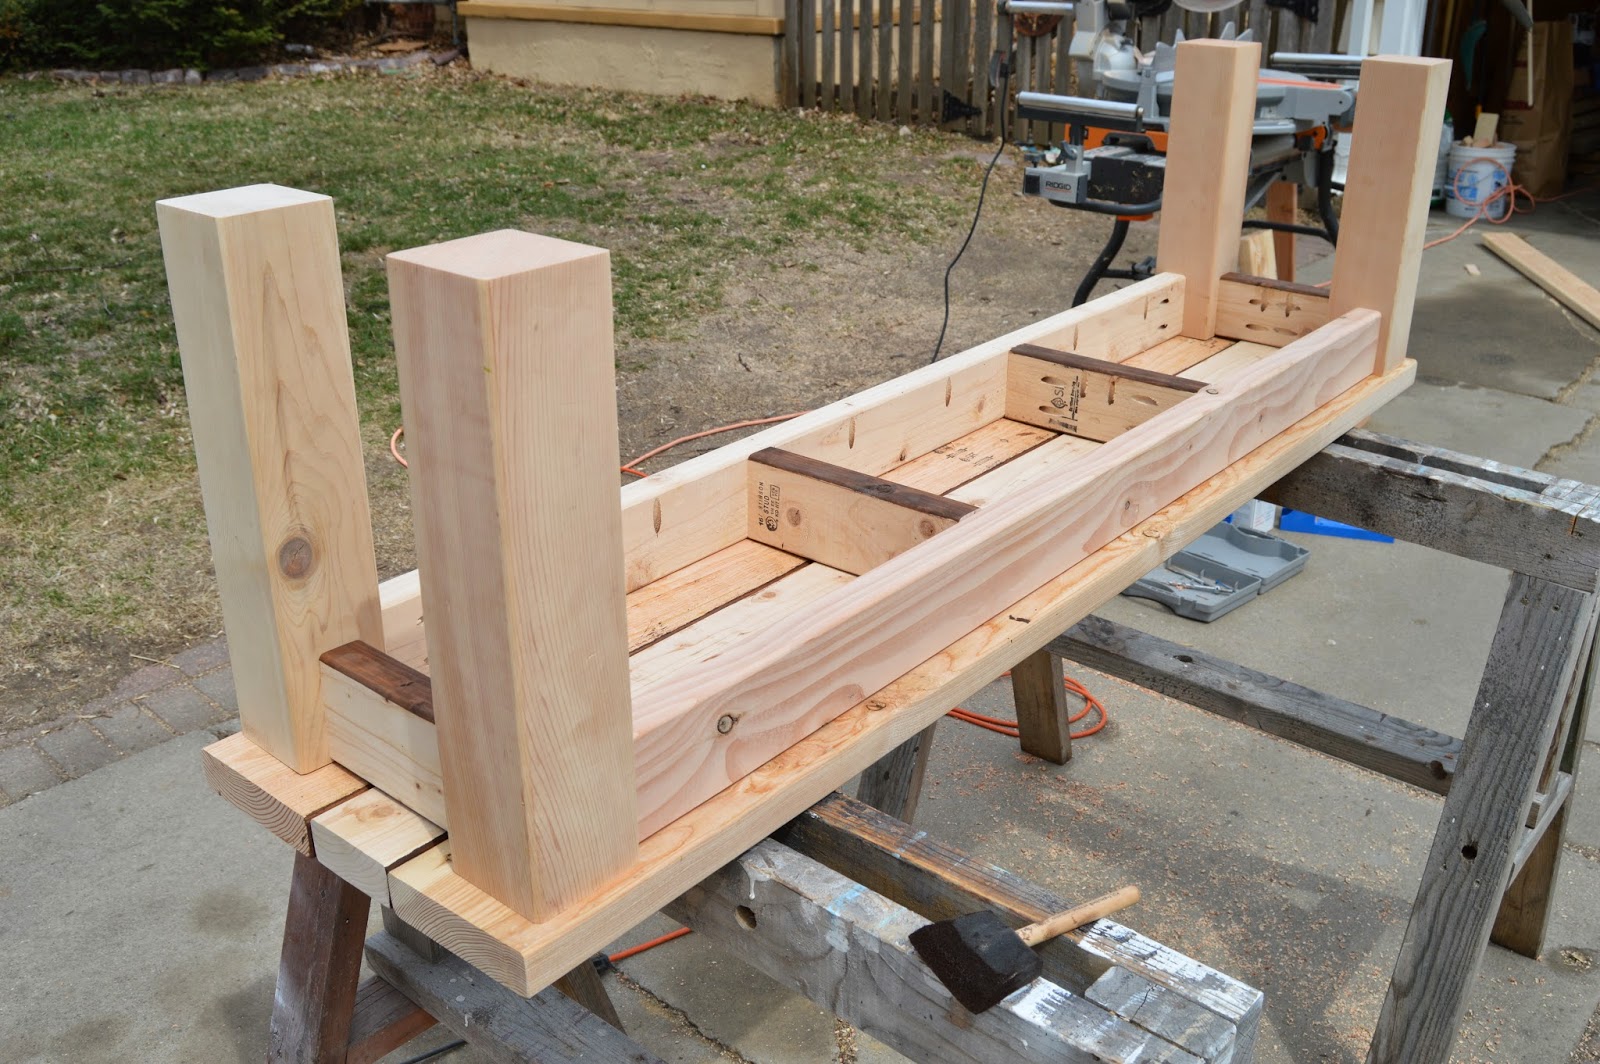 Once both sets of legs are attached, set the bench down to verify it 